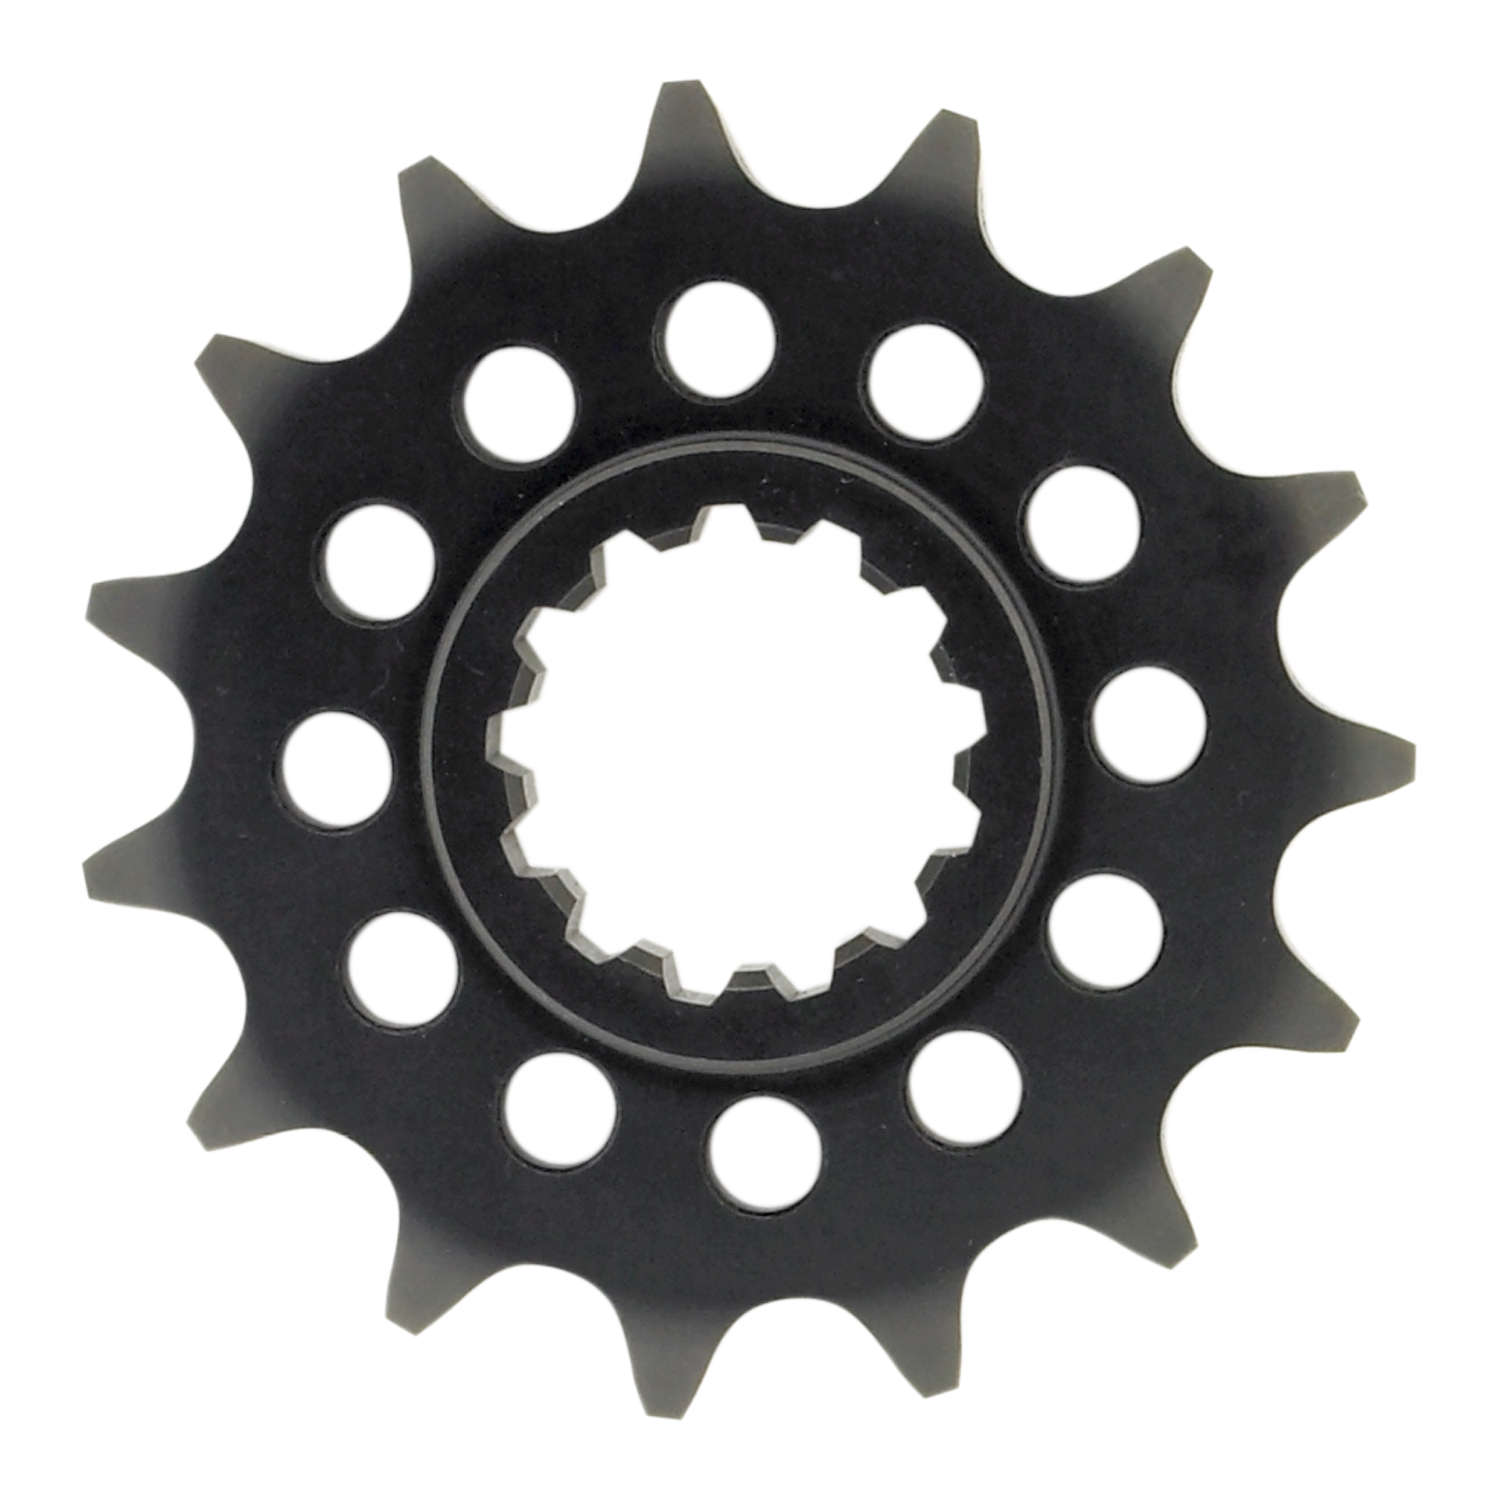 Free Motorcycle Sprocket Cliparts, Download Free Clip Art.